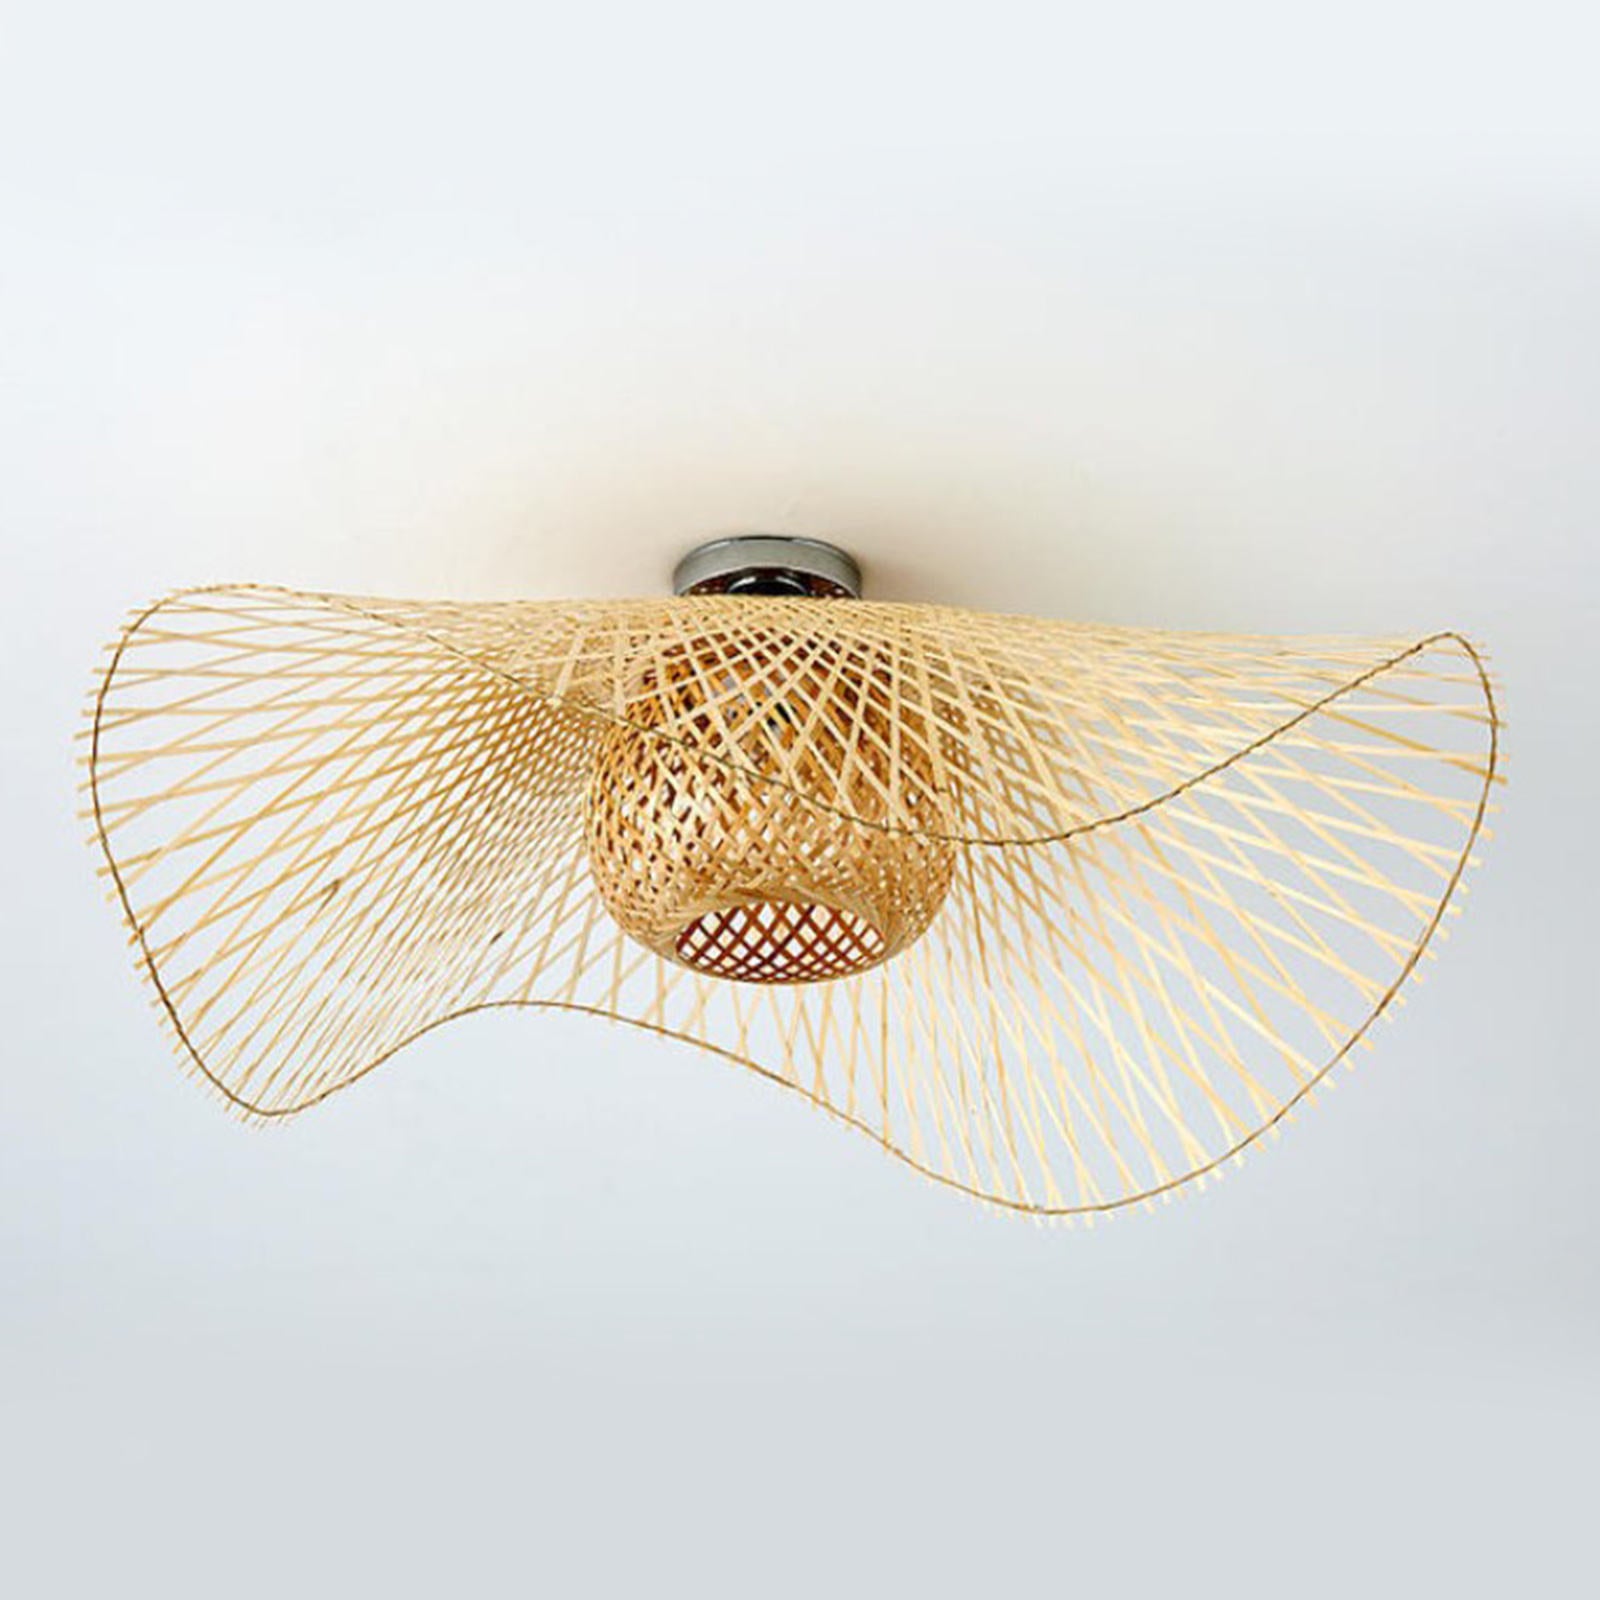 Art Bamboo Woven Ceiling Lighting Shade Pendant Lampshade Bedroom Lamp Cover